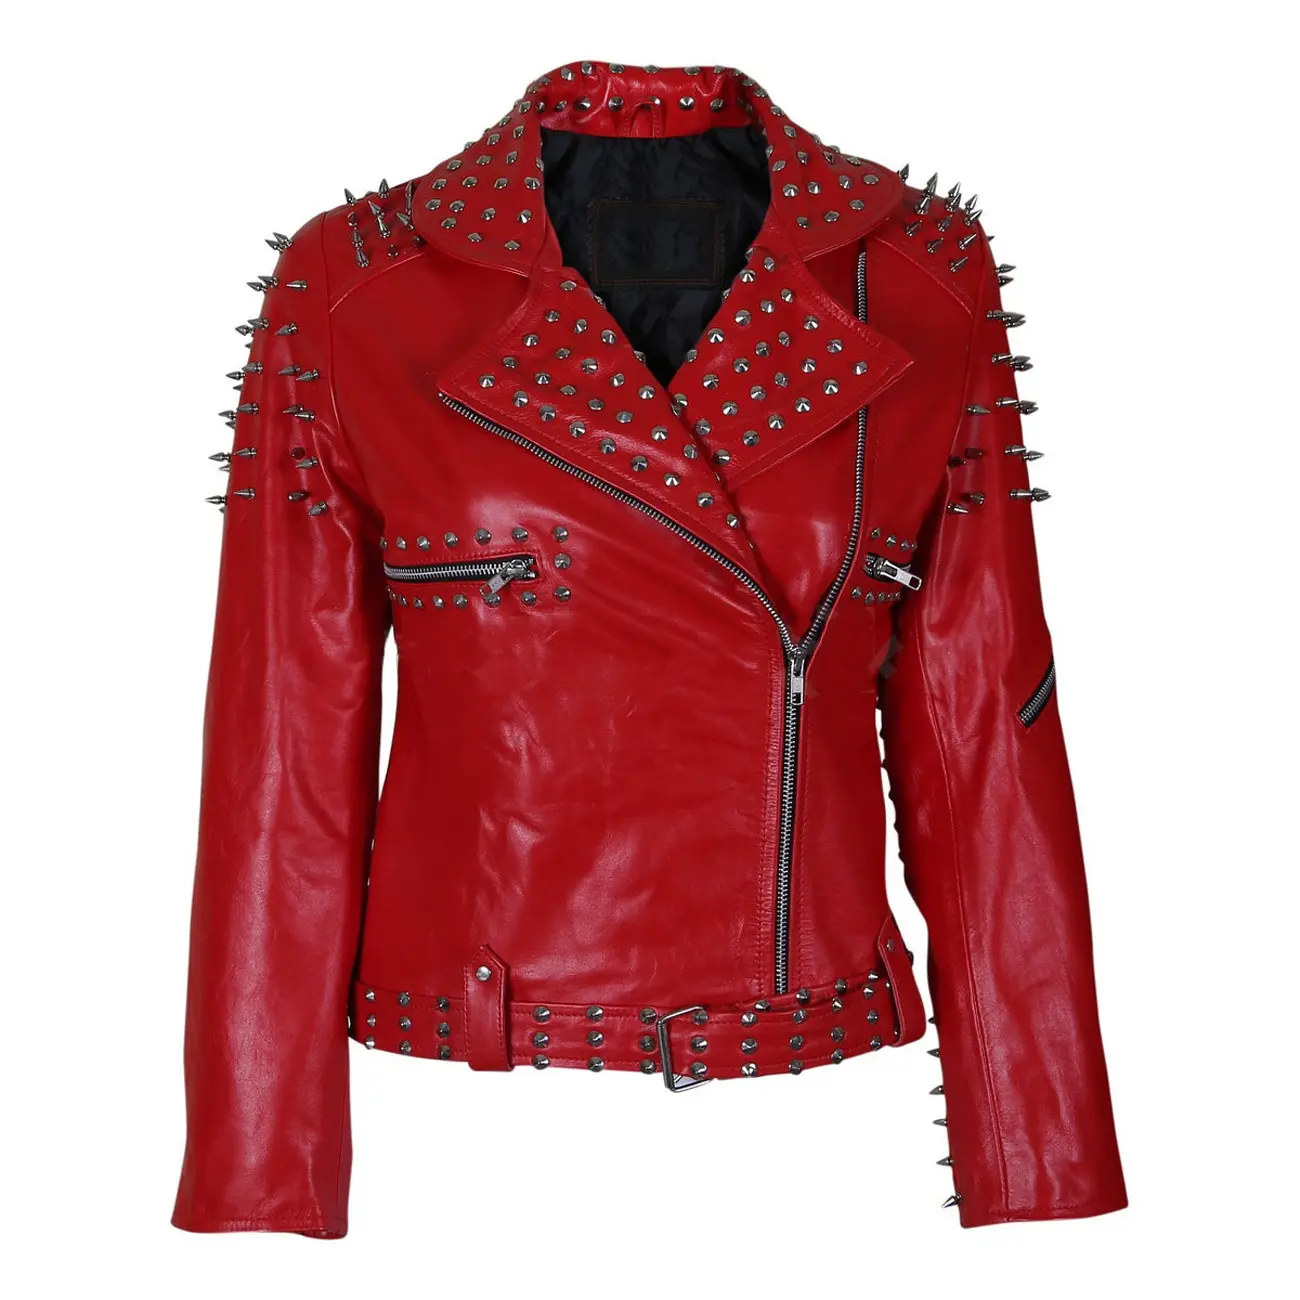 high quality sheep leather Belted leather jacket with cone spikes Silver tree spike studs on the shoulders Quilted black lining